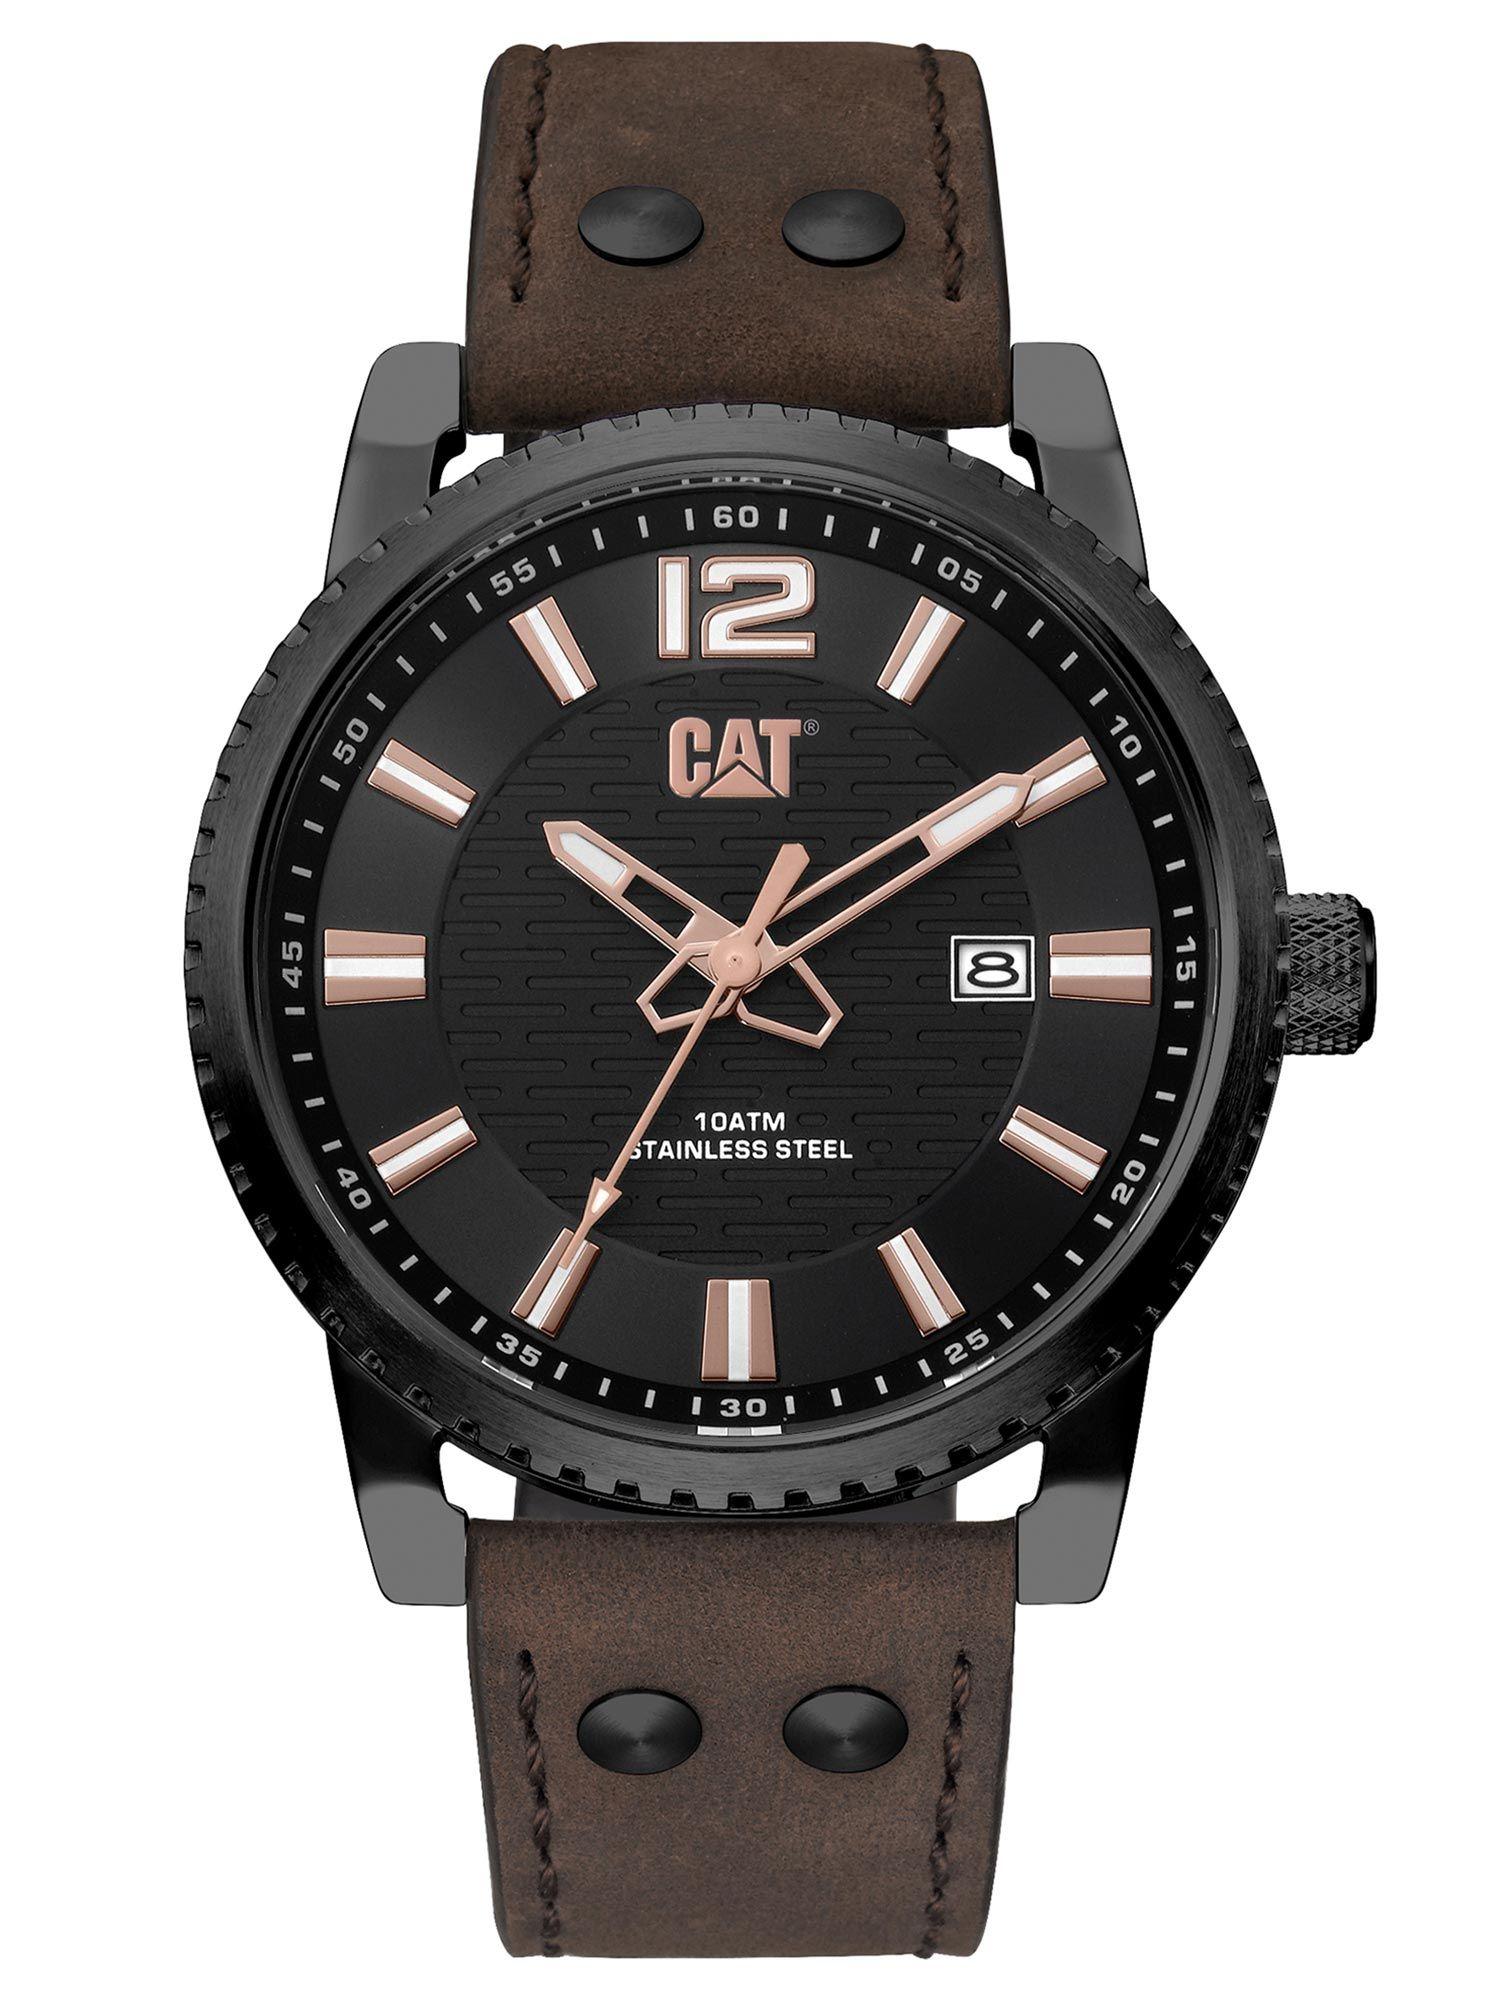 utility np.161.35.139 black dial analog watch for men